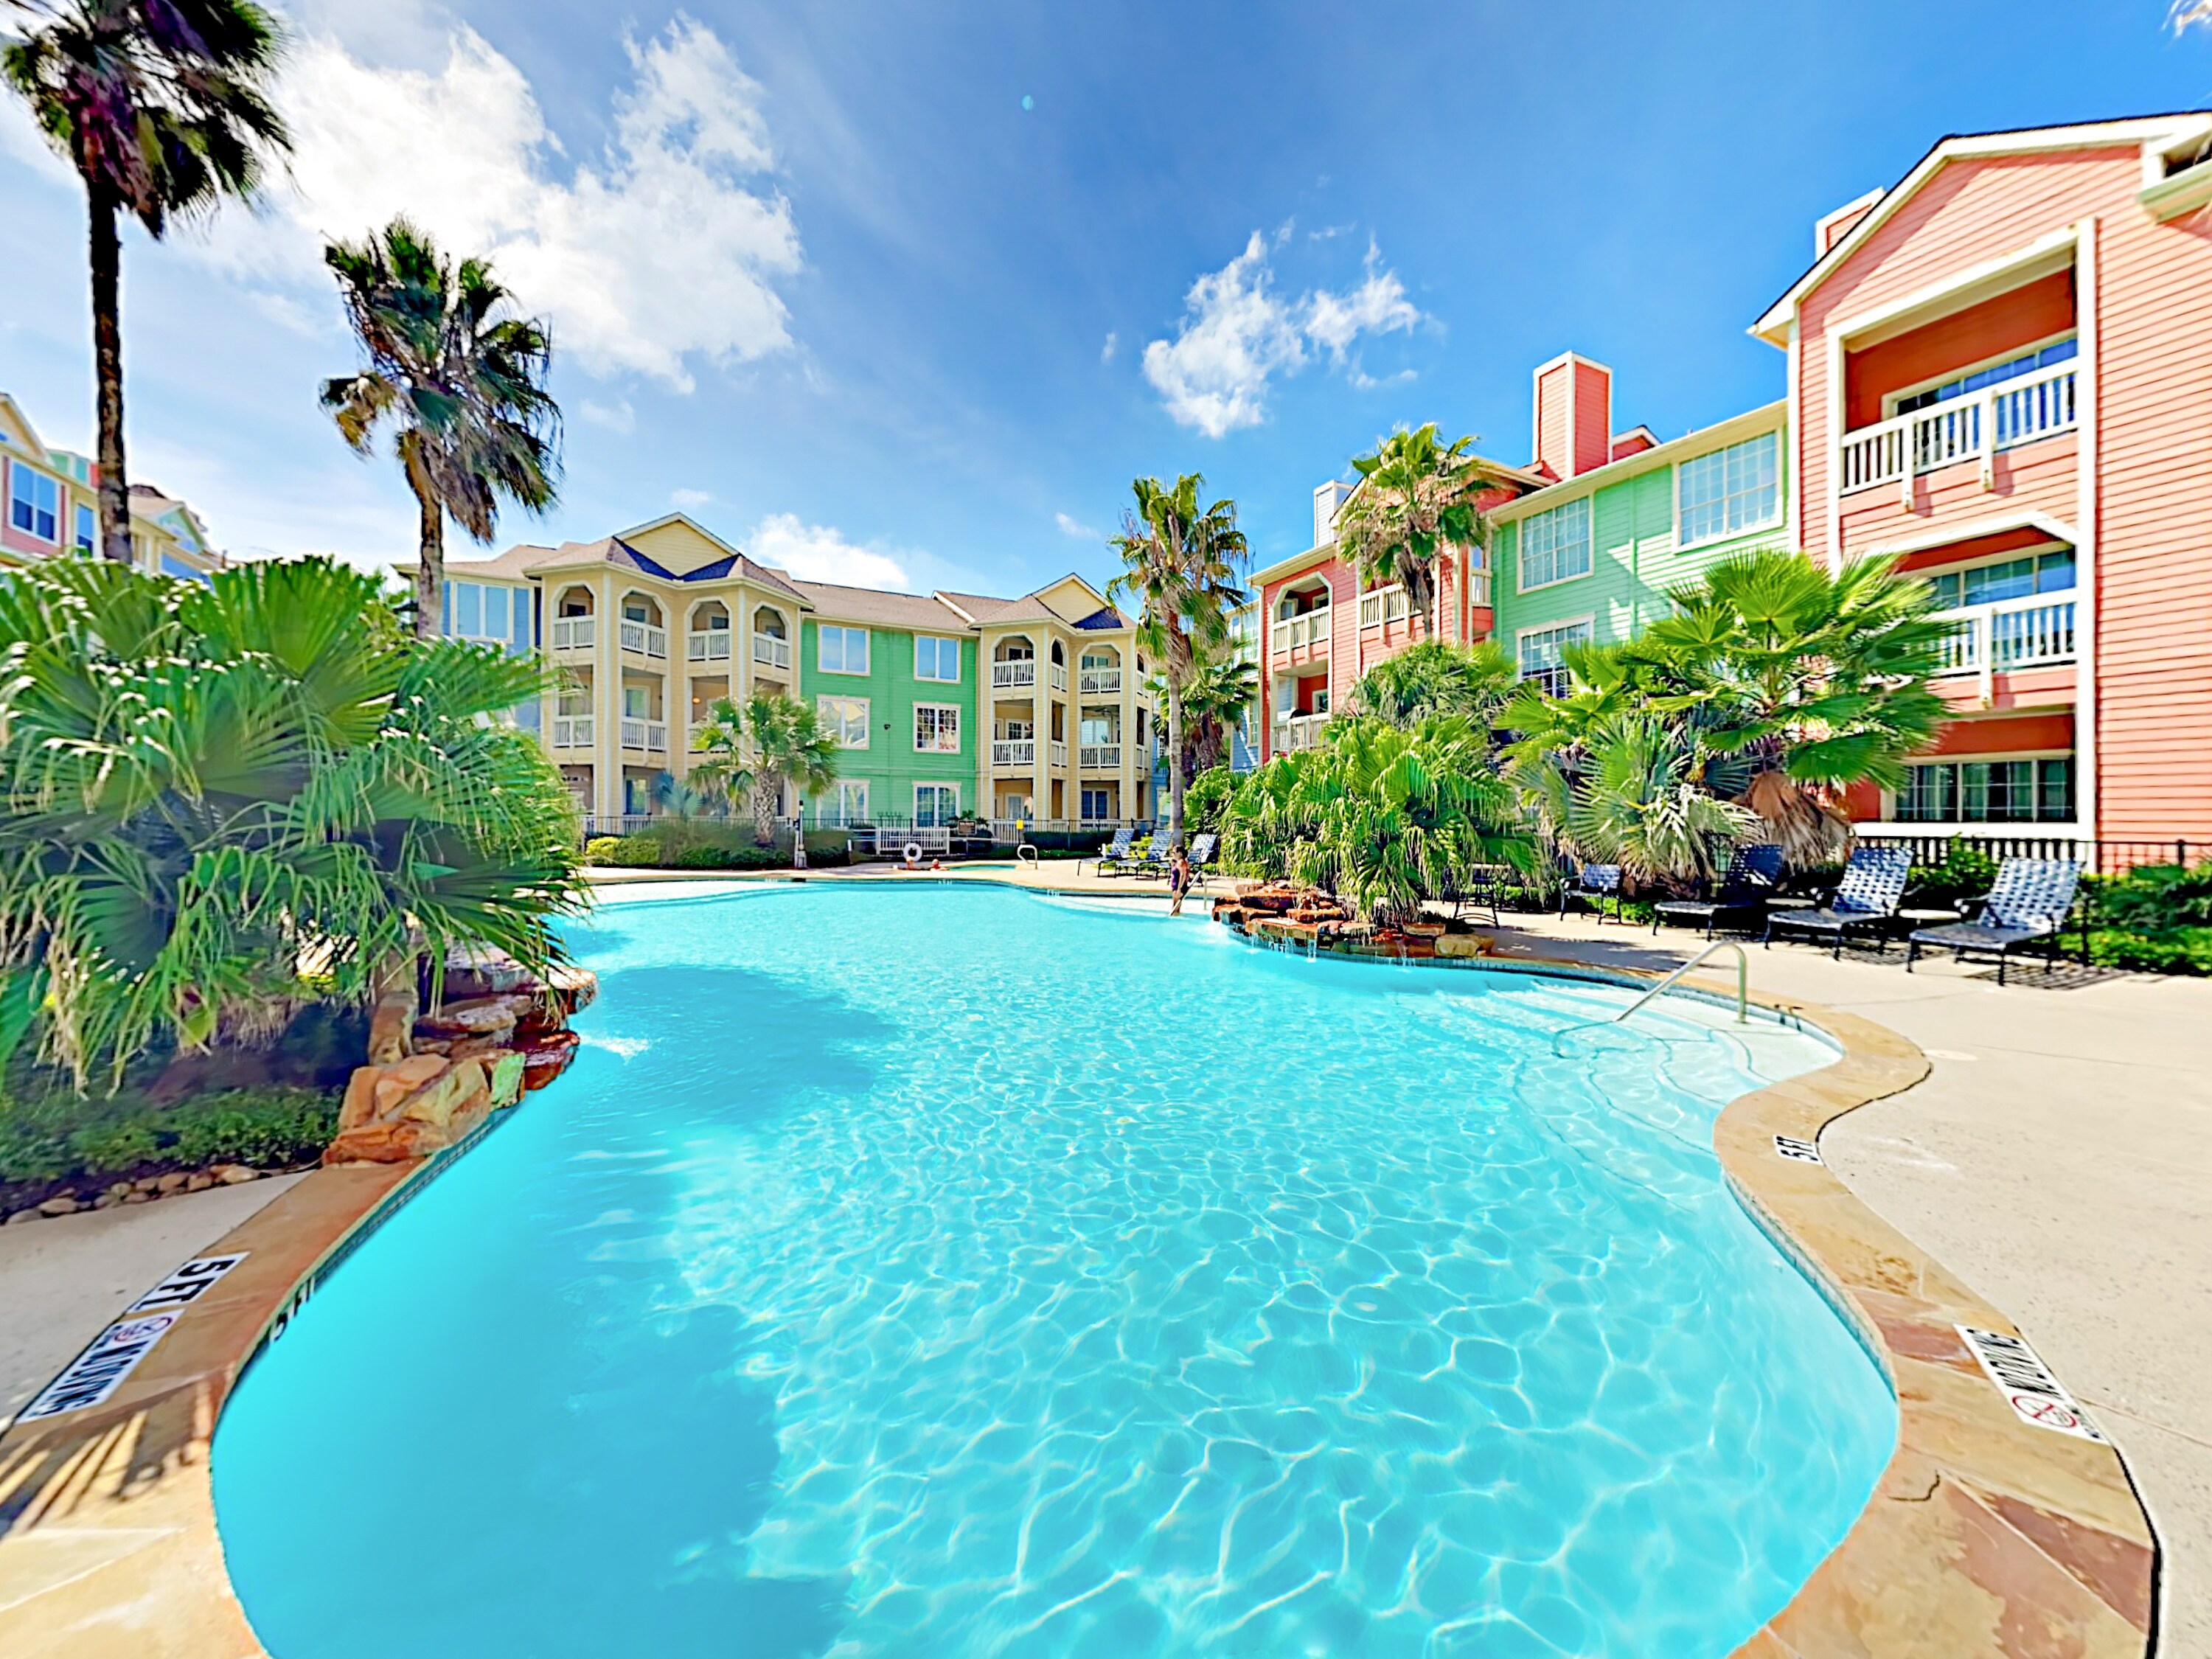 After an exciting day by the shore, take a dip in the complex’s 2 shared pools.